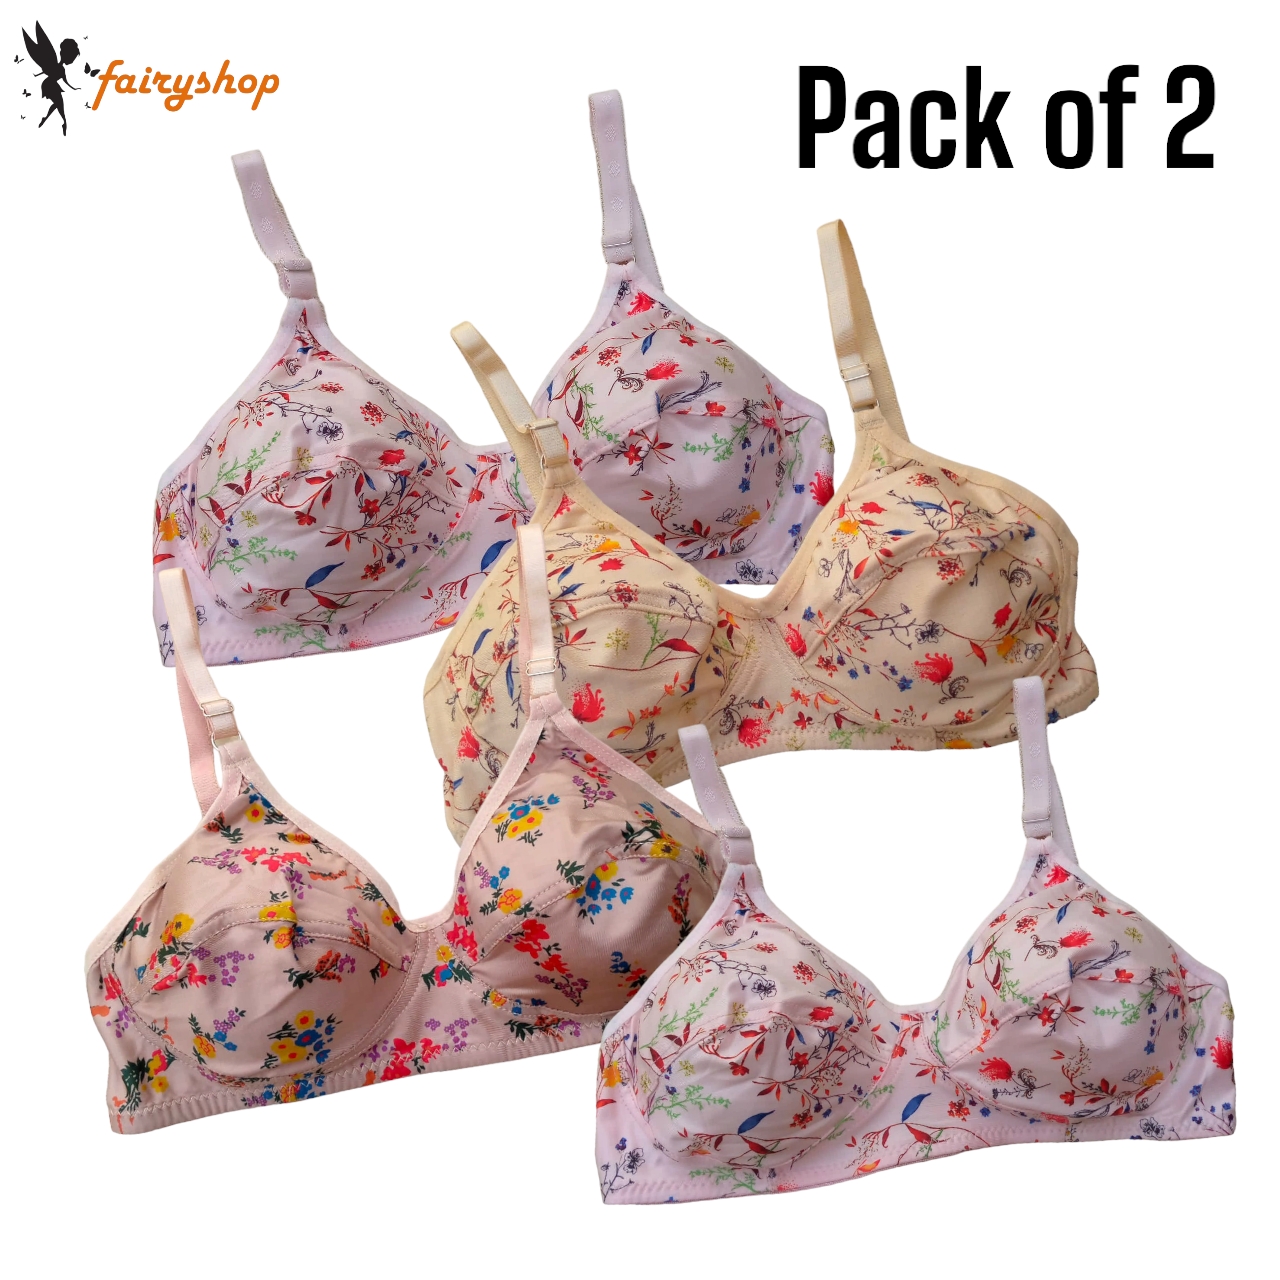 FairyShop Jersey Bra Pack of 2 Flexible Comfortable Non Padded - F542S